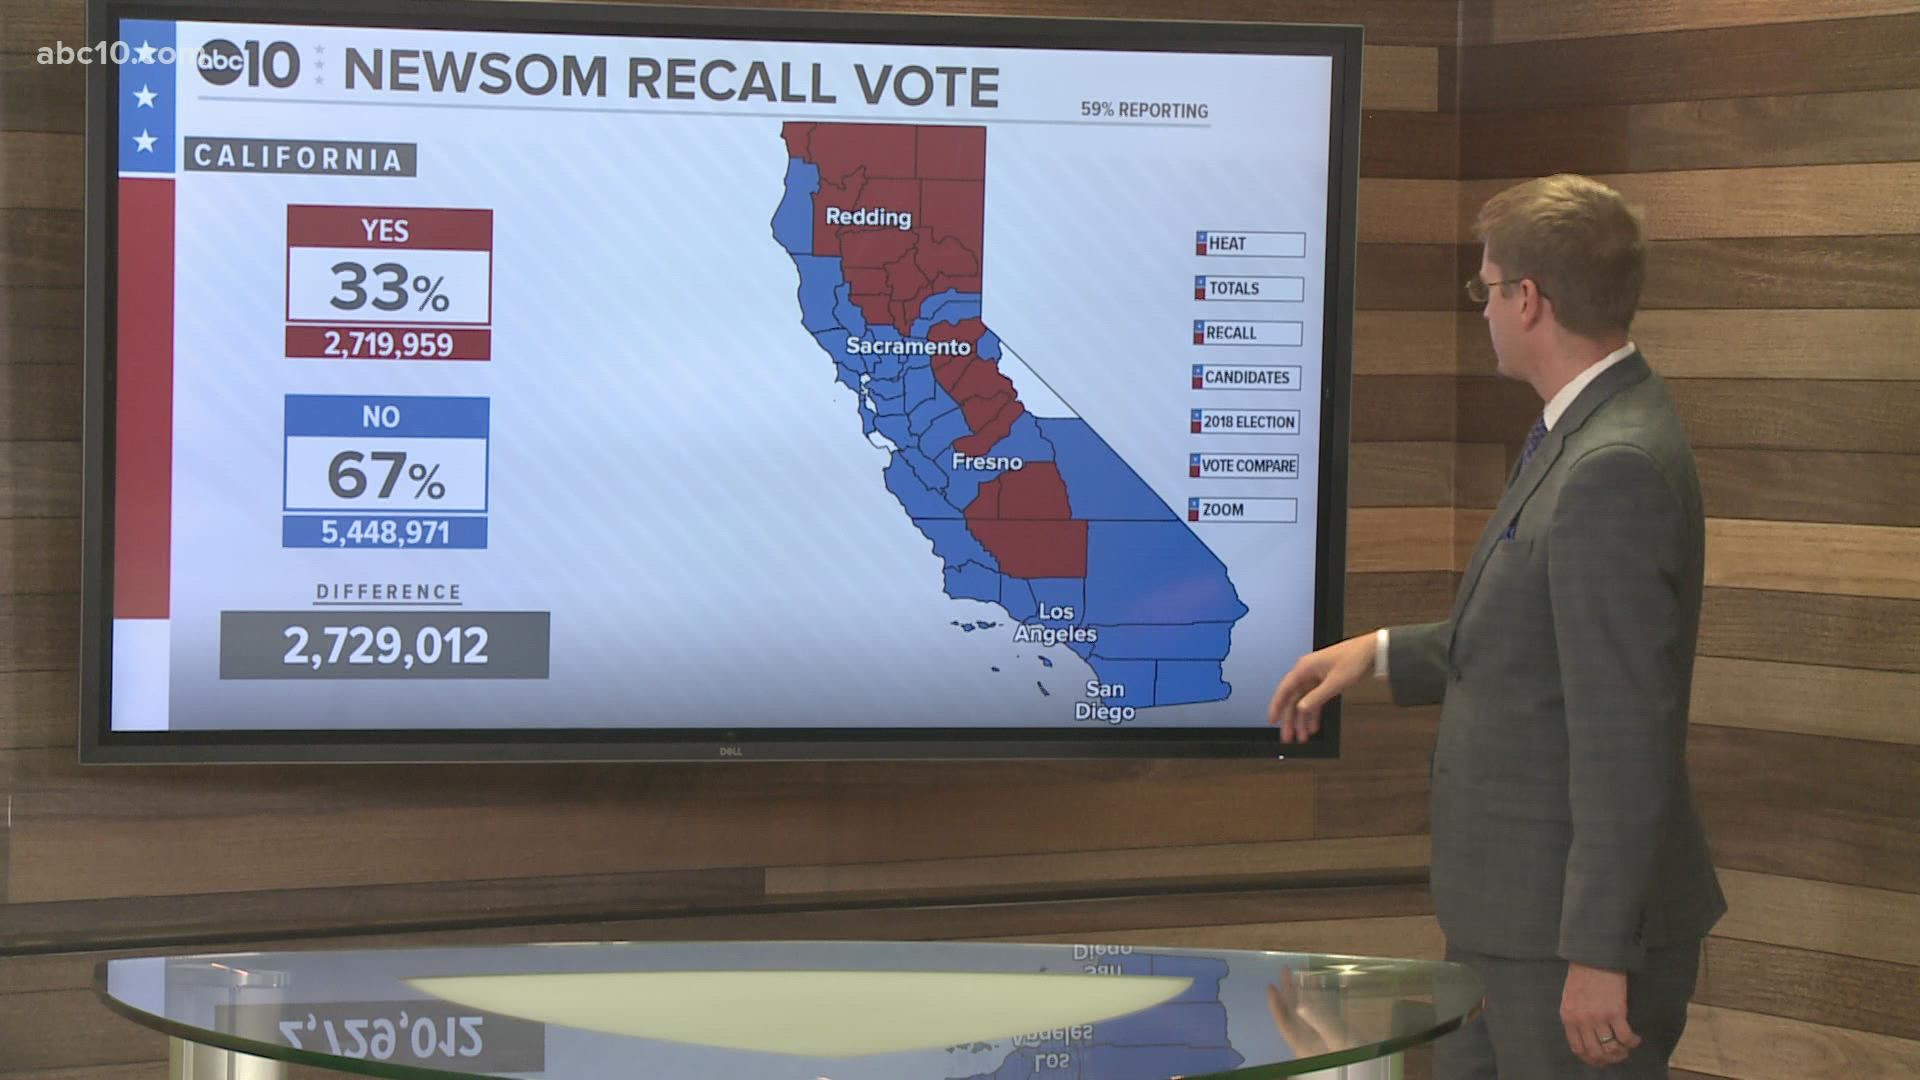 According to projections from ABC News, Gov. Newsom has defeated the recall attempt.